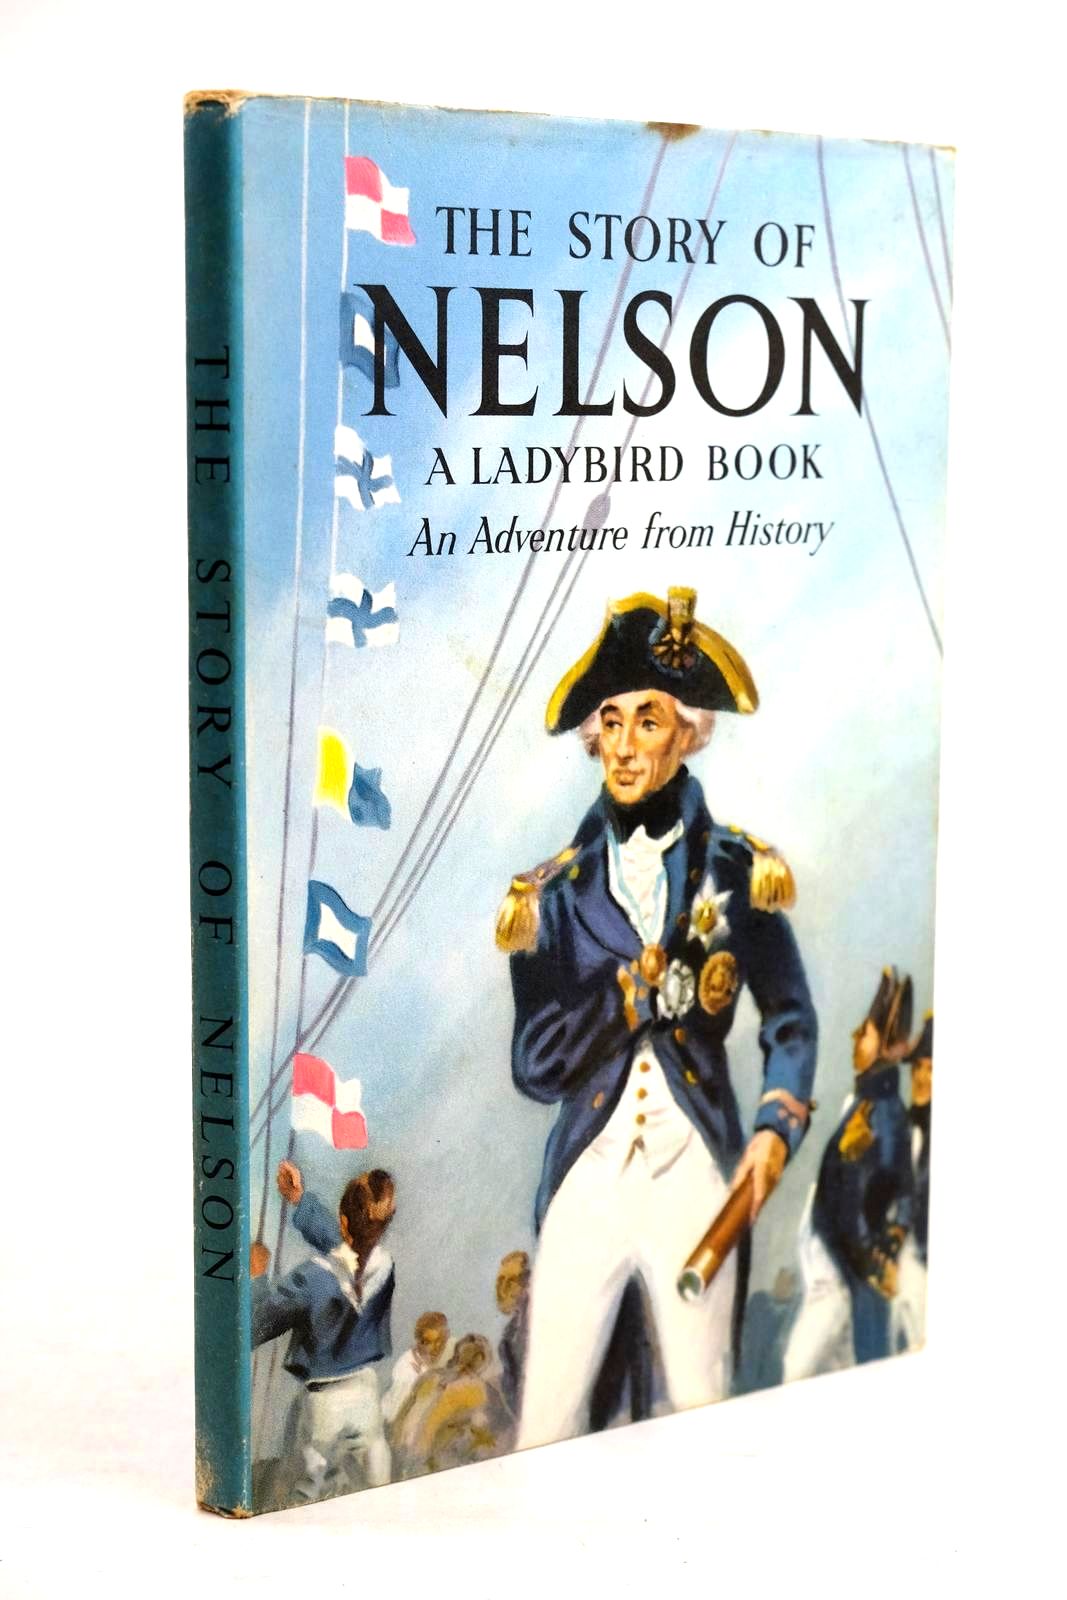 Photo of THE STORY OF NELSON written by Peach, L. Du Garde illustrated by Kenney, John published by Wills &amp; Hepworth Ltd. (STOCK CODE: 1320625)  for sale by Stella & Rose's Books